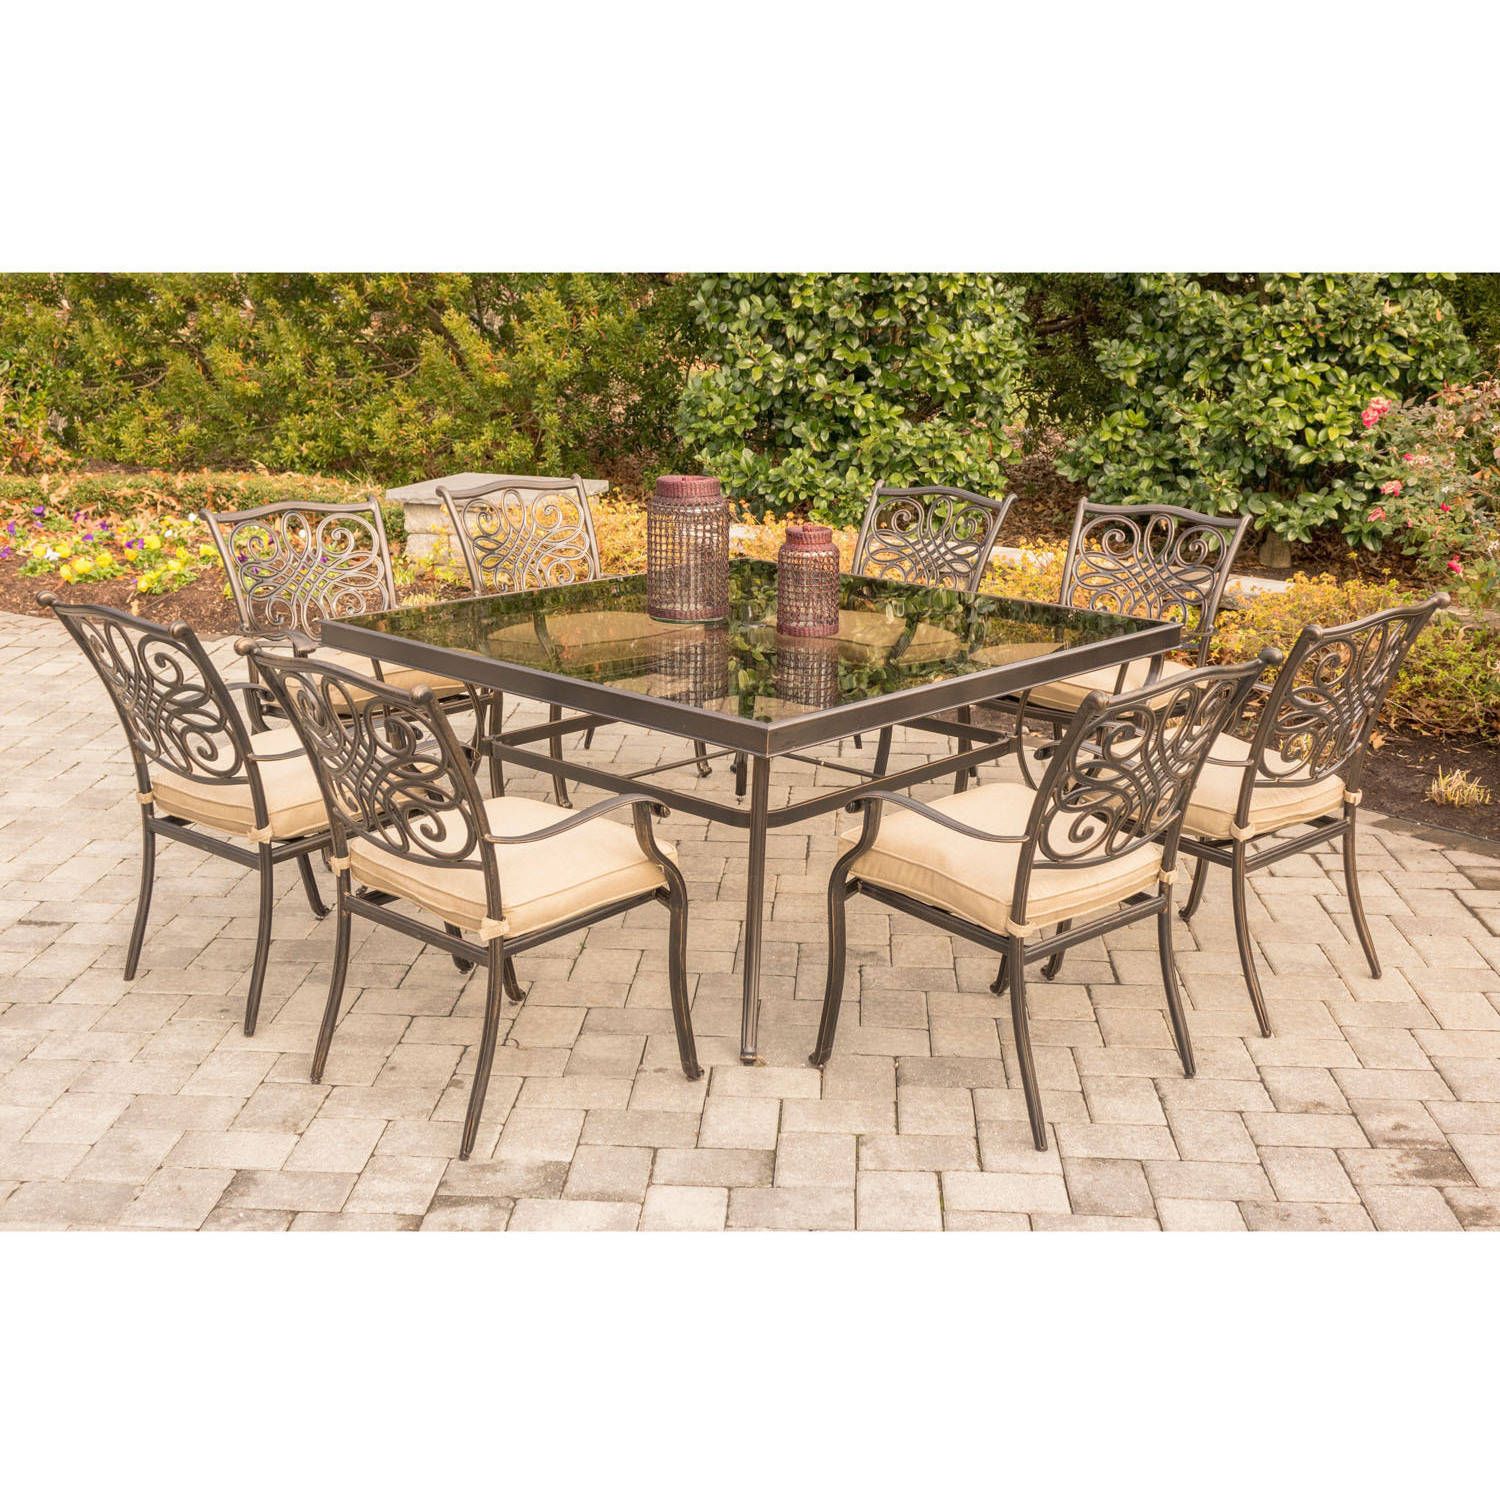 Hanover Outdoor Traditions 9 Piece Dining Set With 60" Square Glass Top Intended For 9 Piece Outdoor Square Dining Sets (View 10 of 15)